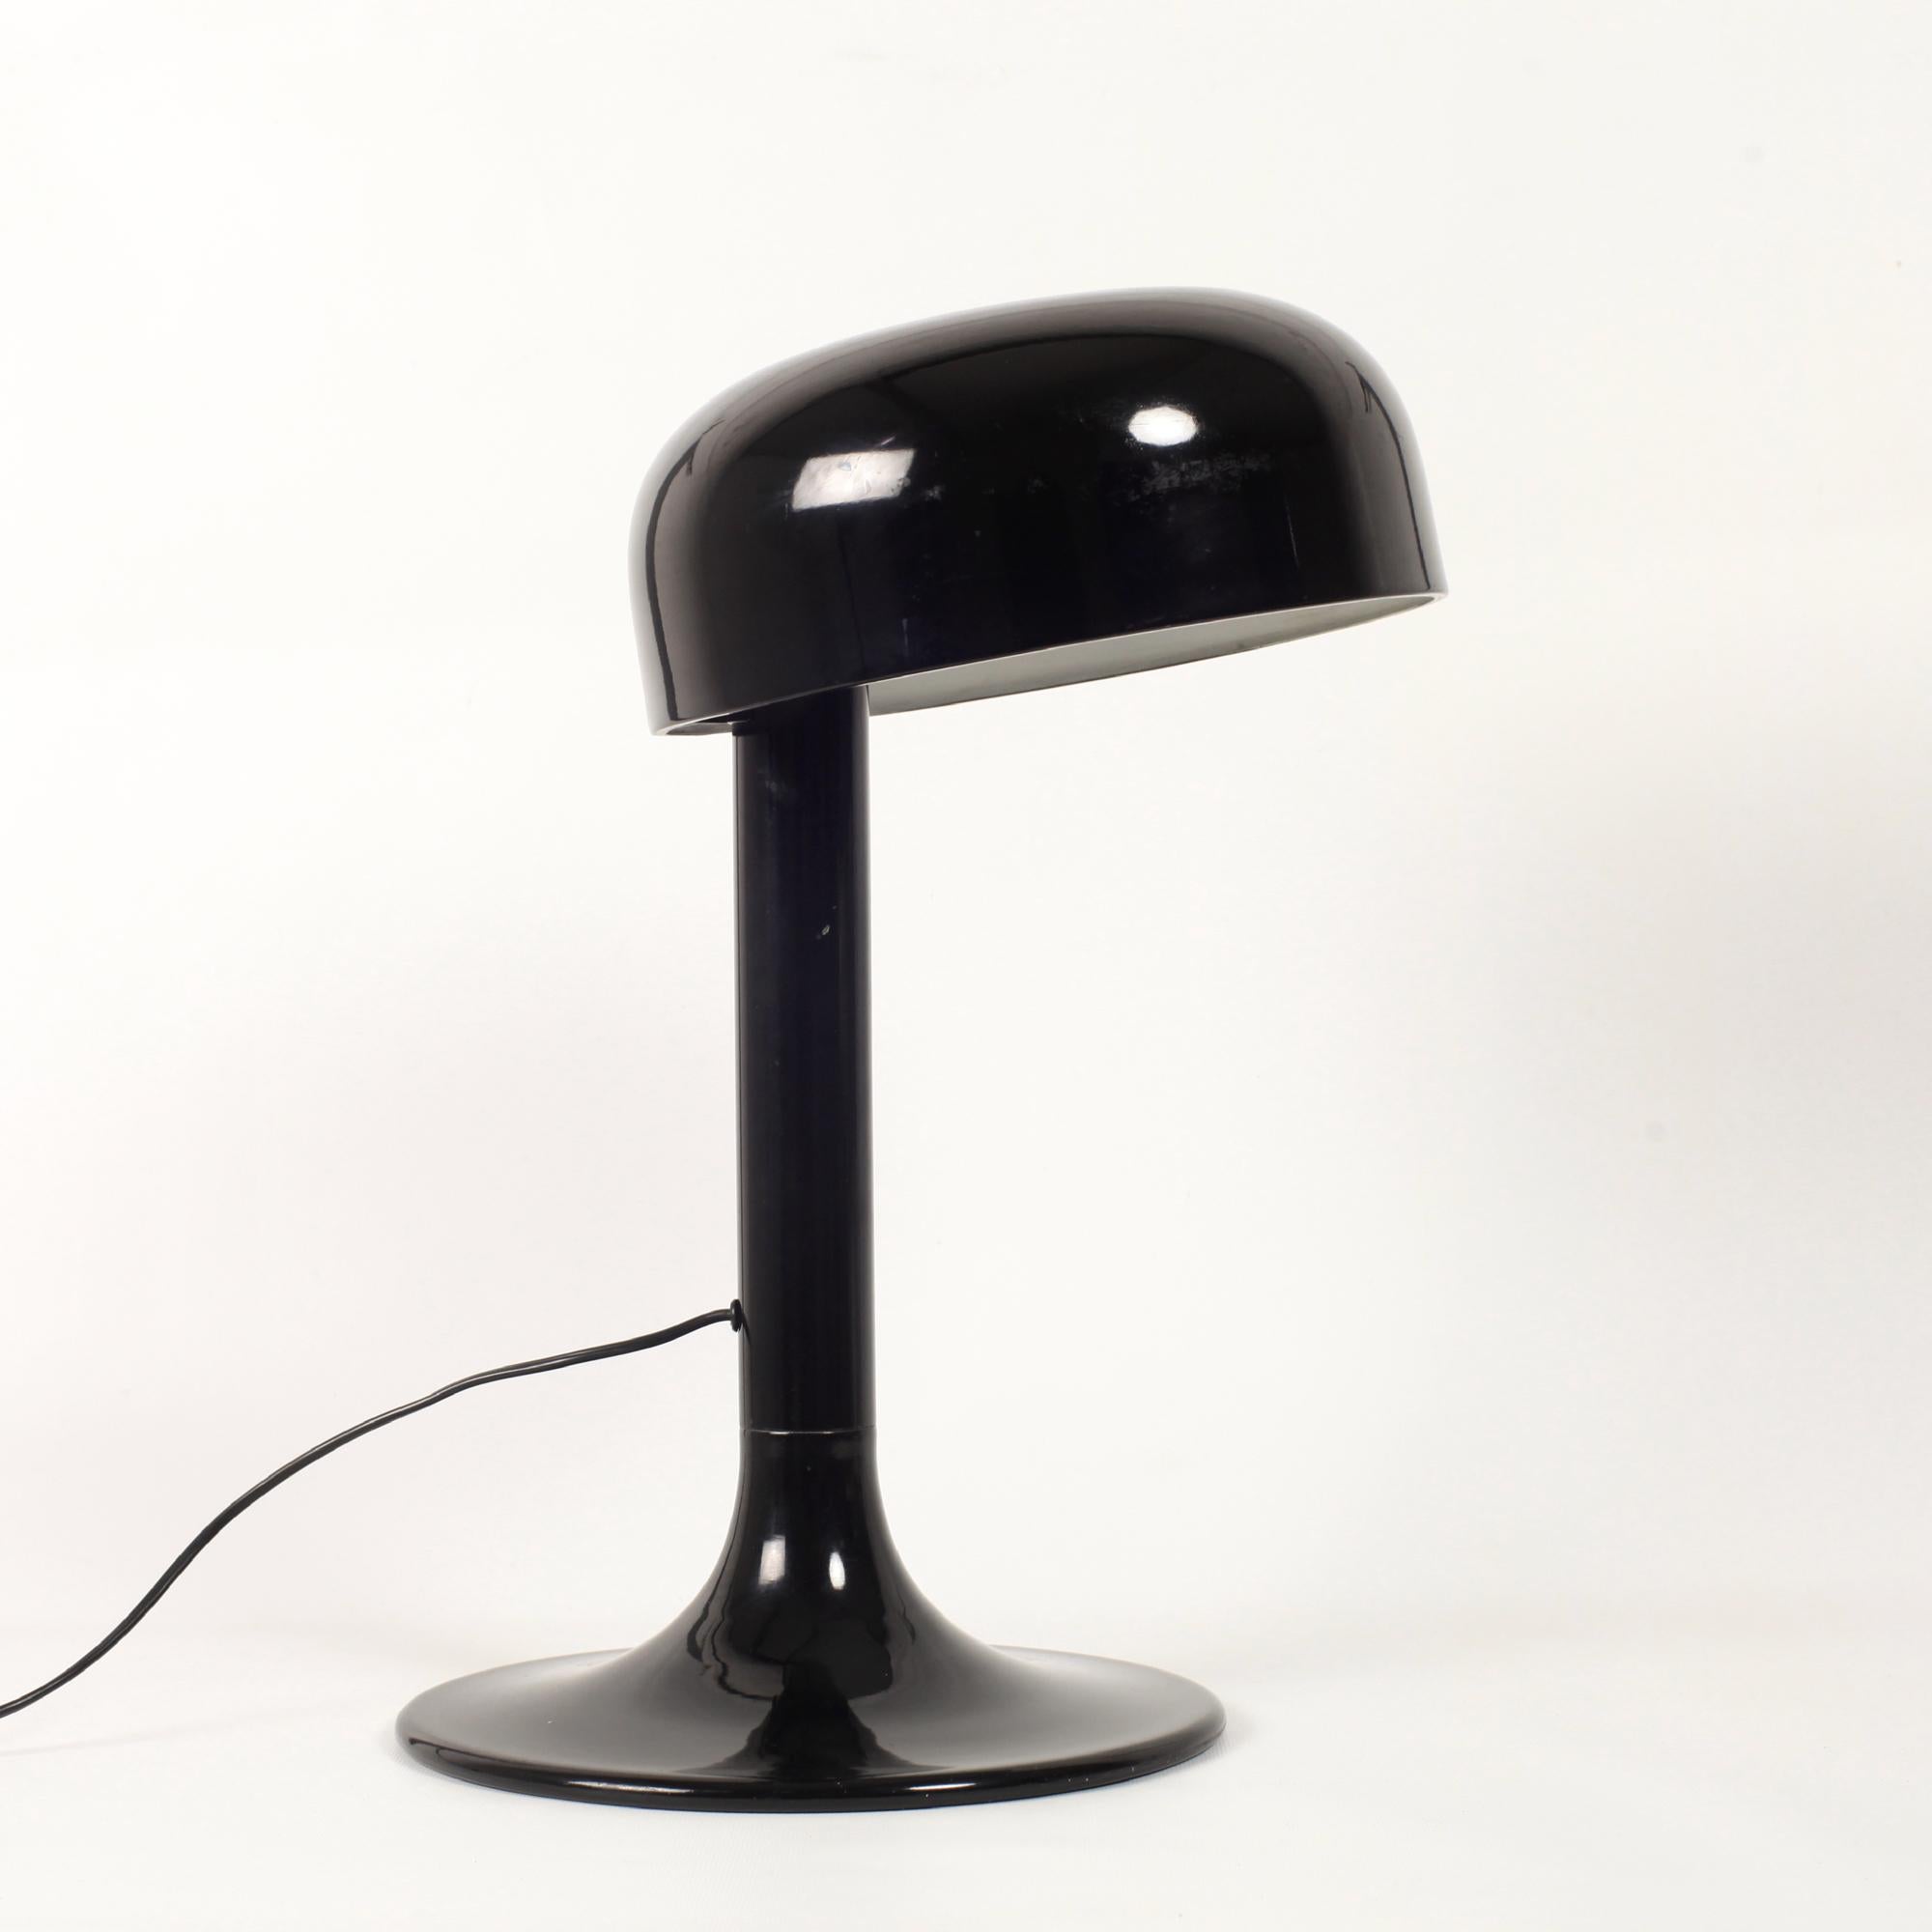 Rare table lamp model Studio deisigned  by Carlo Viligiardi for Stilnovo Italy in 1972.
Very nice clean shape from the 70s made in glossy black lacquered metal with folding shade. E27 bulb.
Carlo Viligiardi Italian architect and designer well known